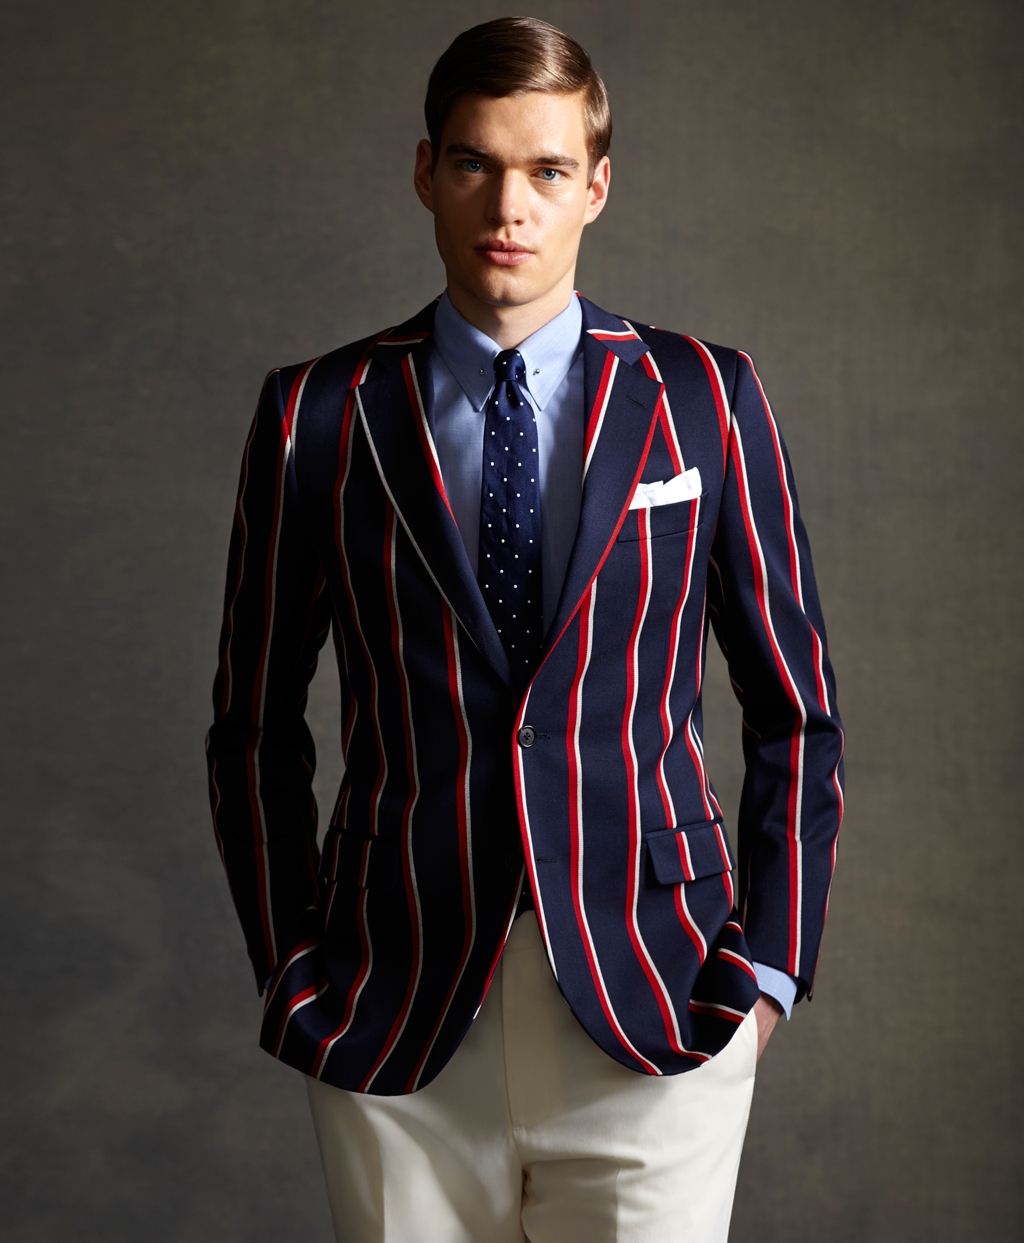 Lyst - Brooks Brothers The Great Gatsby Collection Red White and Navy ...